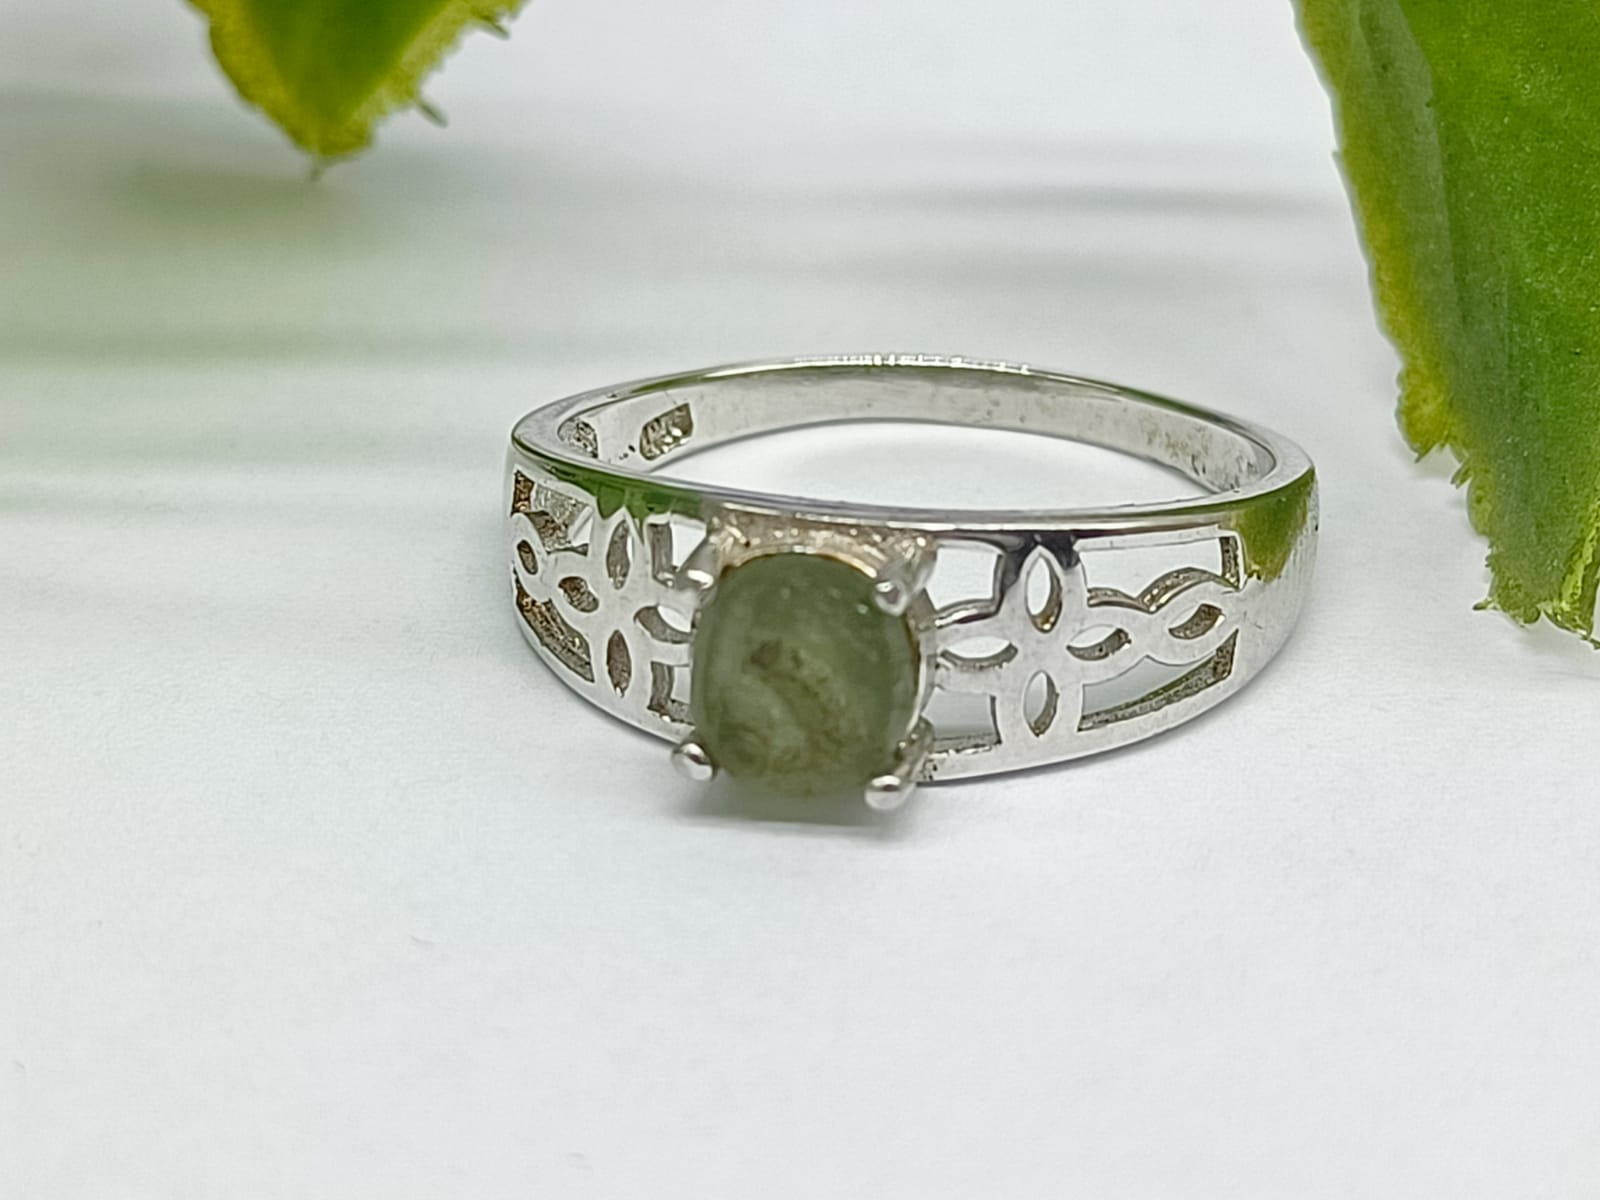 Authentic Moldavite 925 Silver Ring Size 6 Crystal Wellness